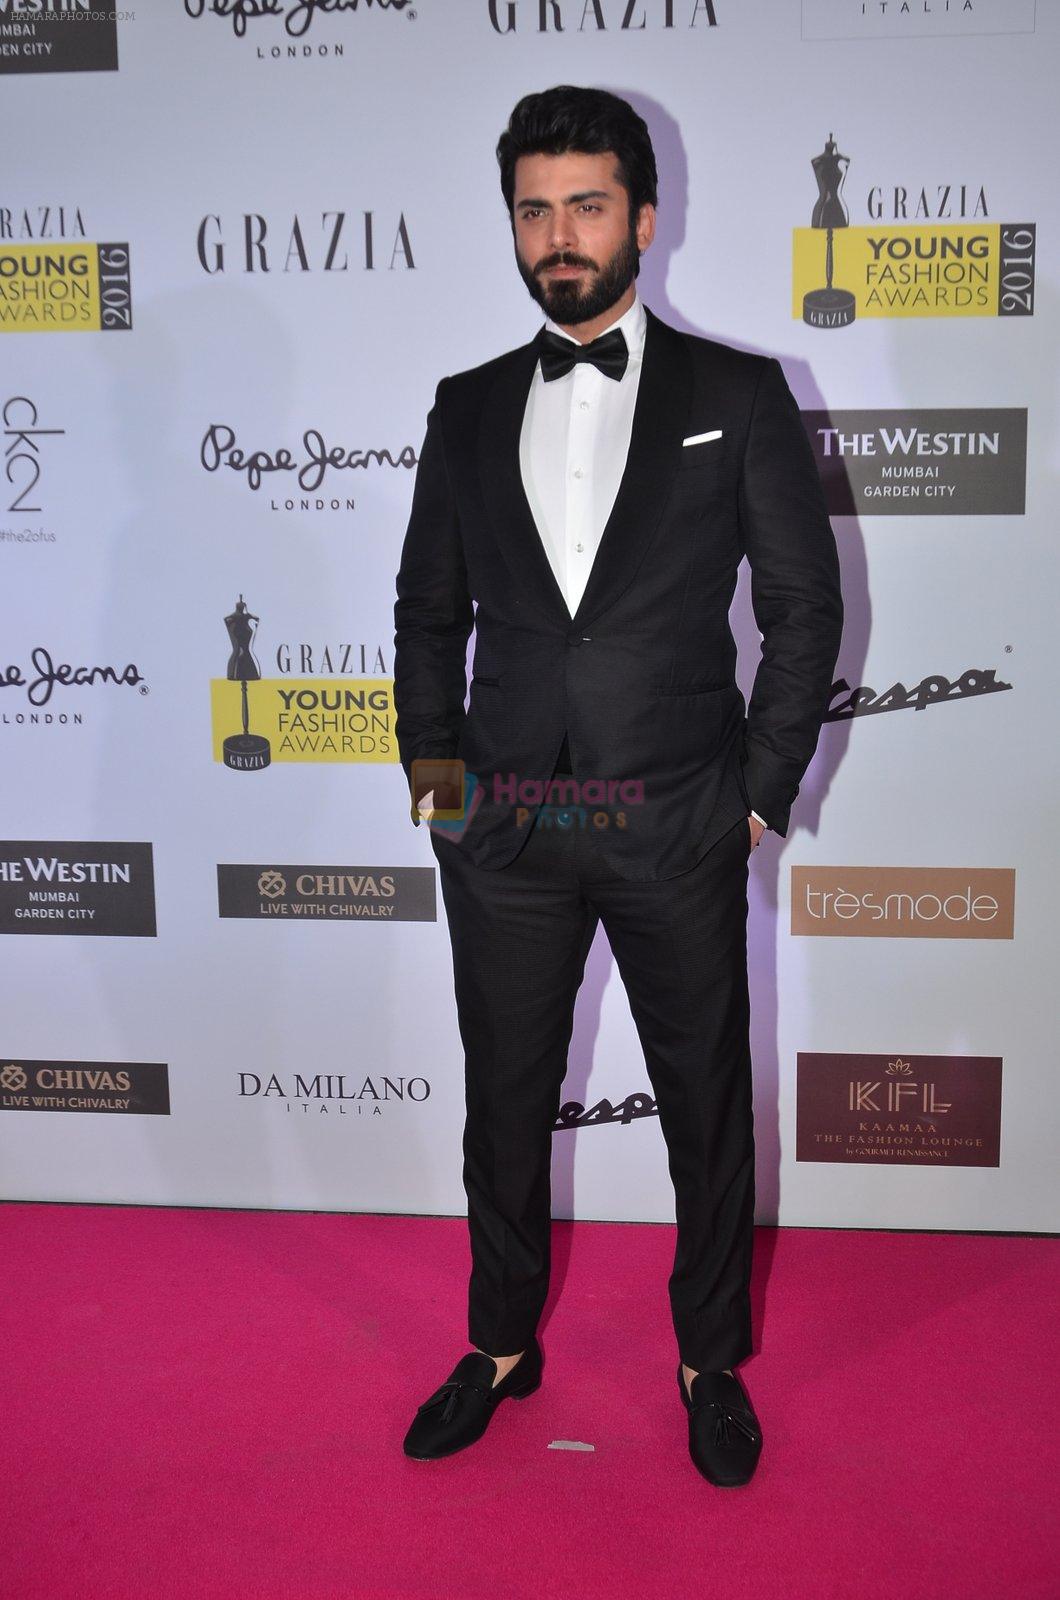 Fawad Khan at Grazia Young Fashion Awards 2016 Red Carpet on 7th April 2016